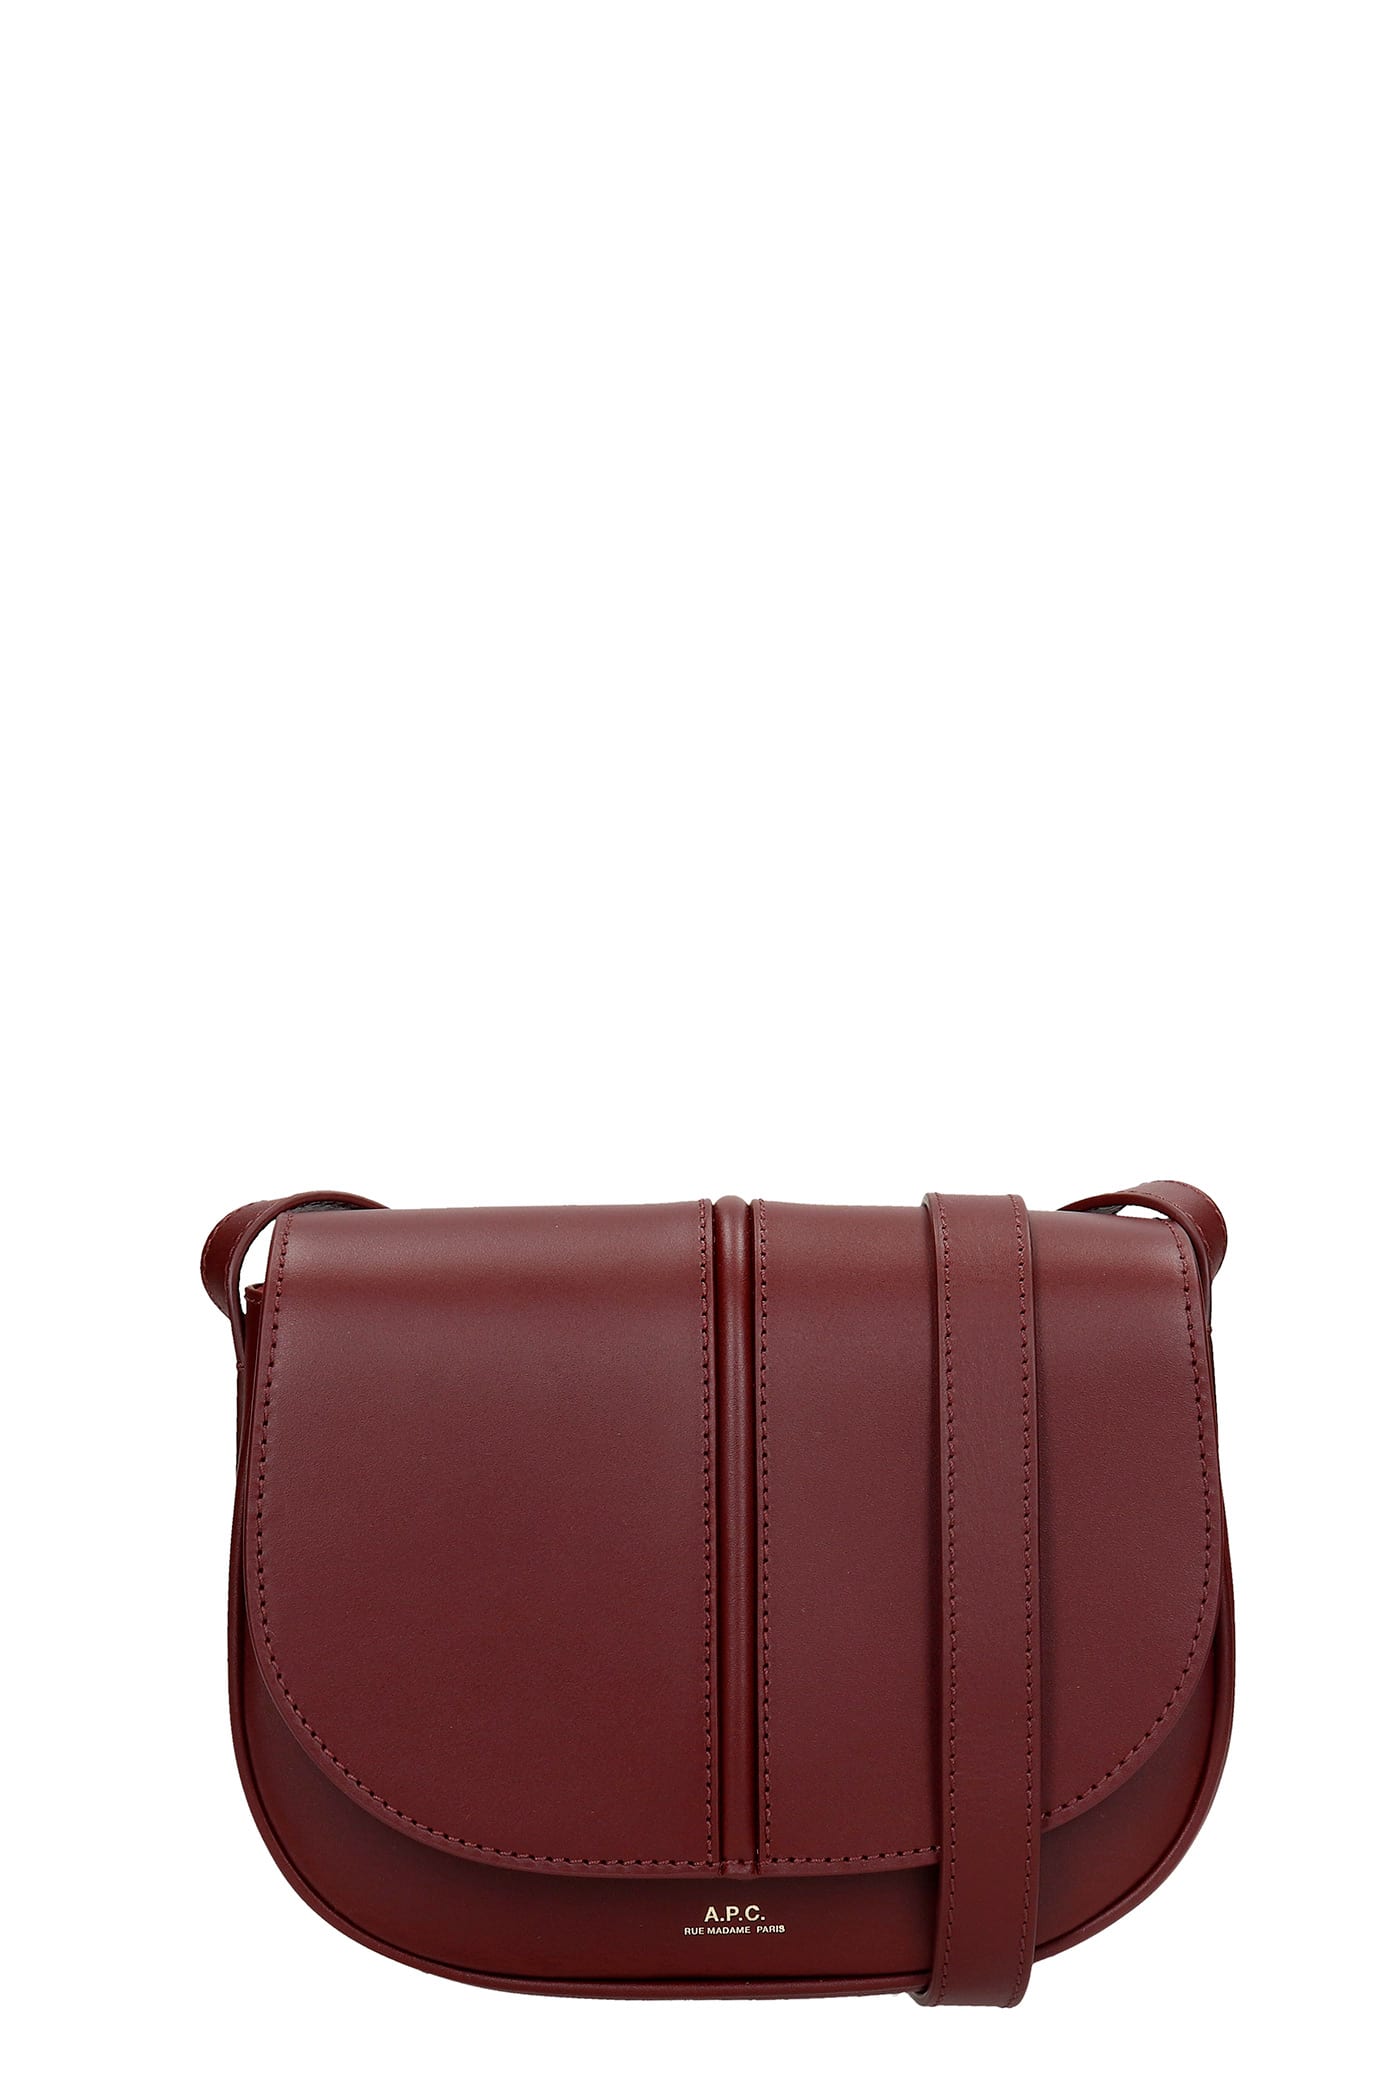 A.P.C. Betty Shoulder Bag In Red Leather